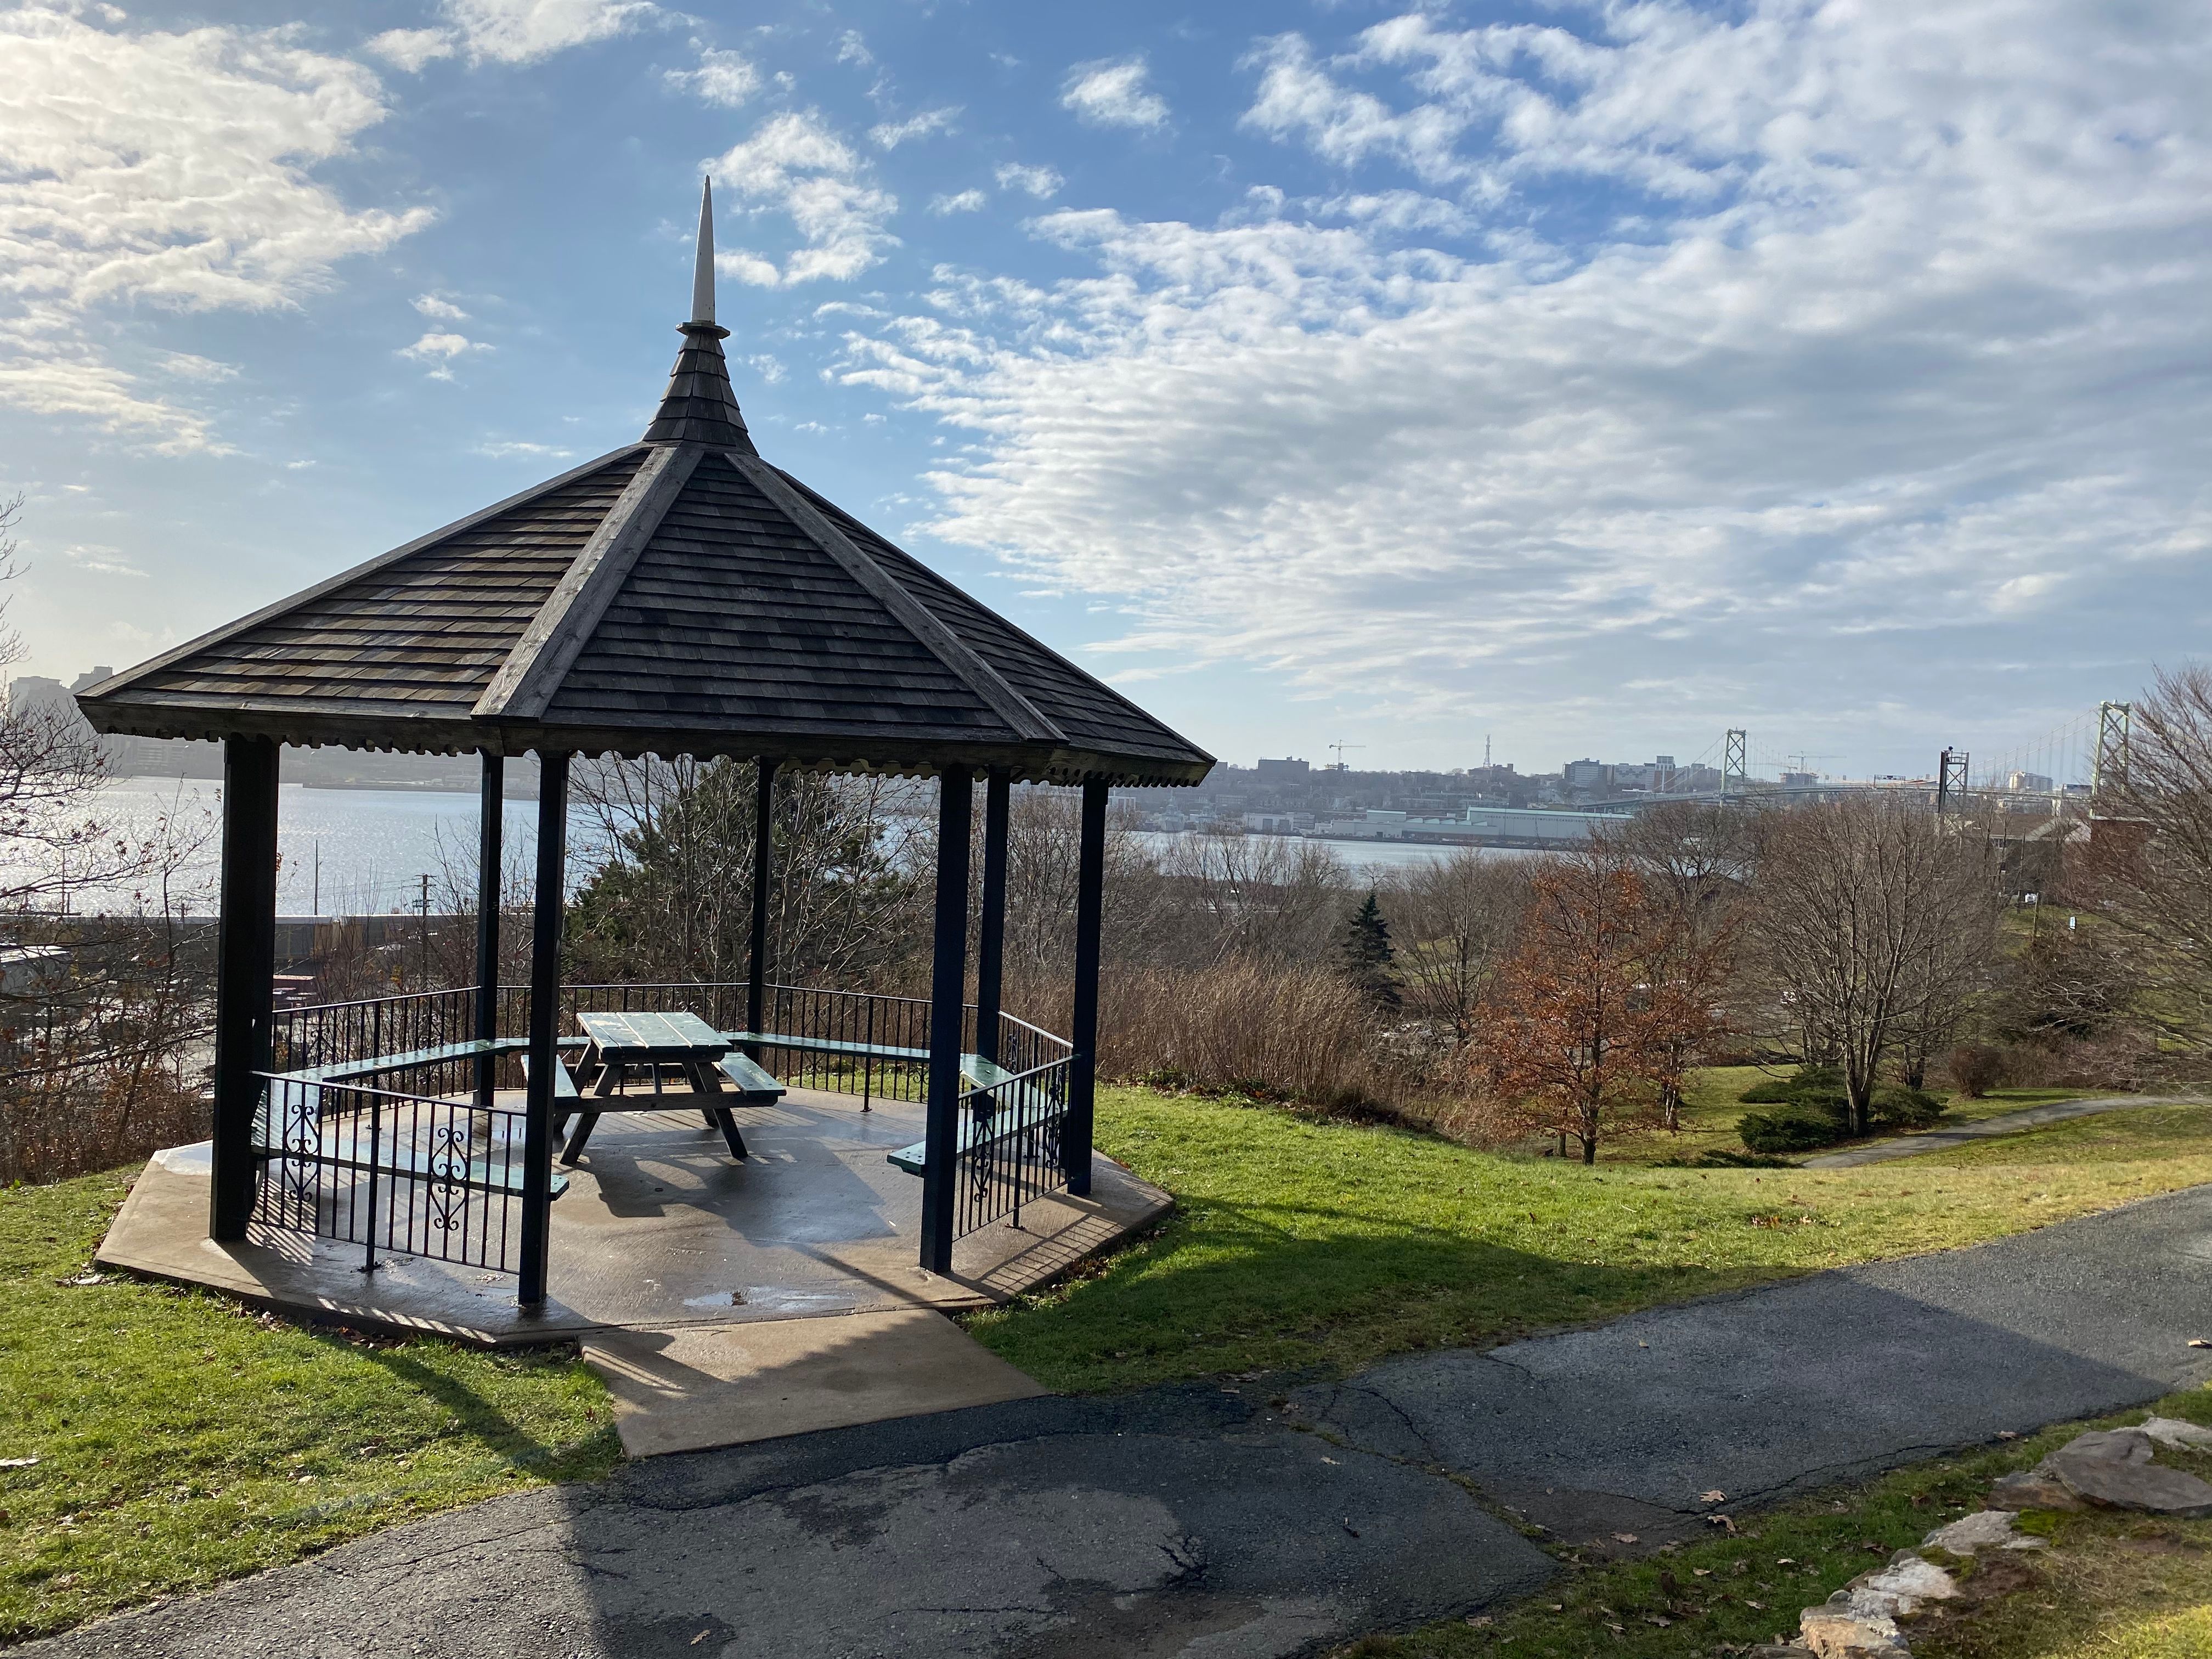 Gazebo in Halifax's Dartmouth Commons allows for gathering and shelter from the elements. Credit: Adri Stark